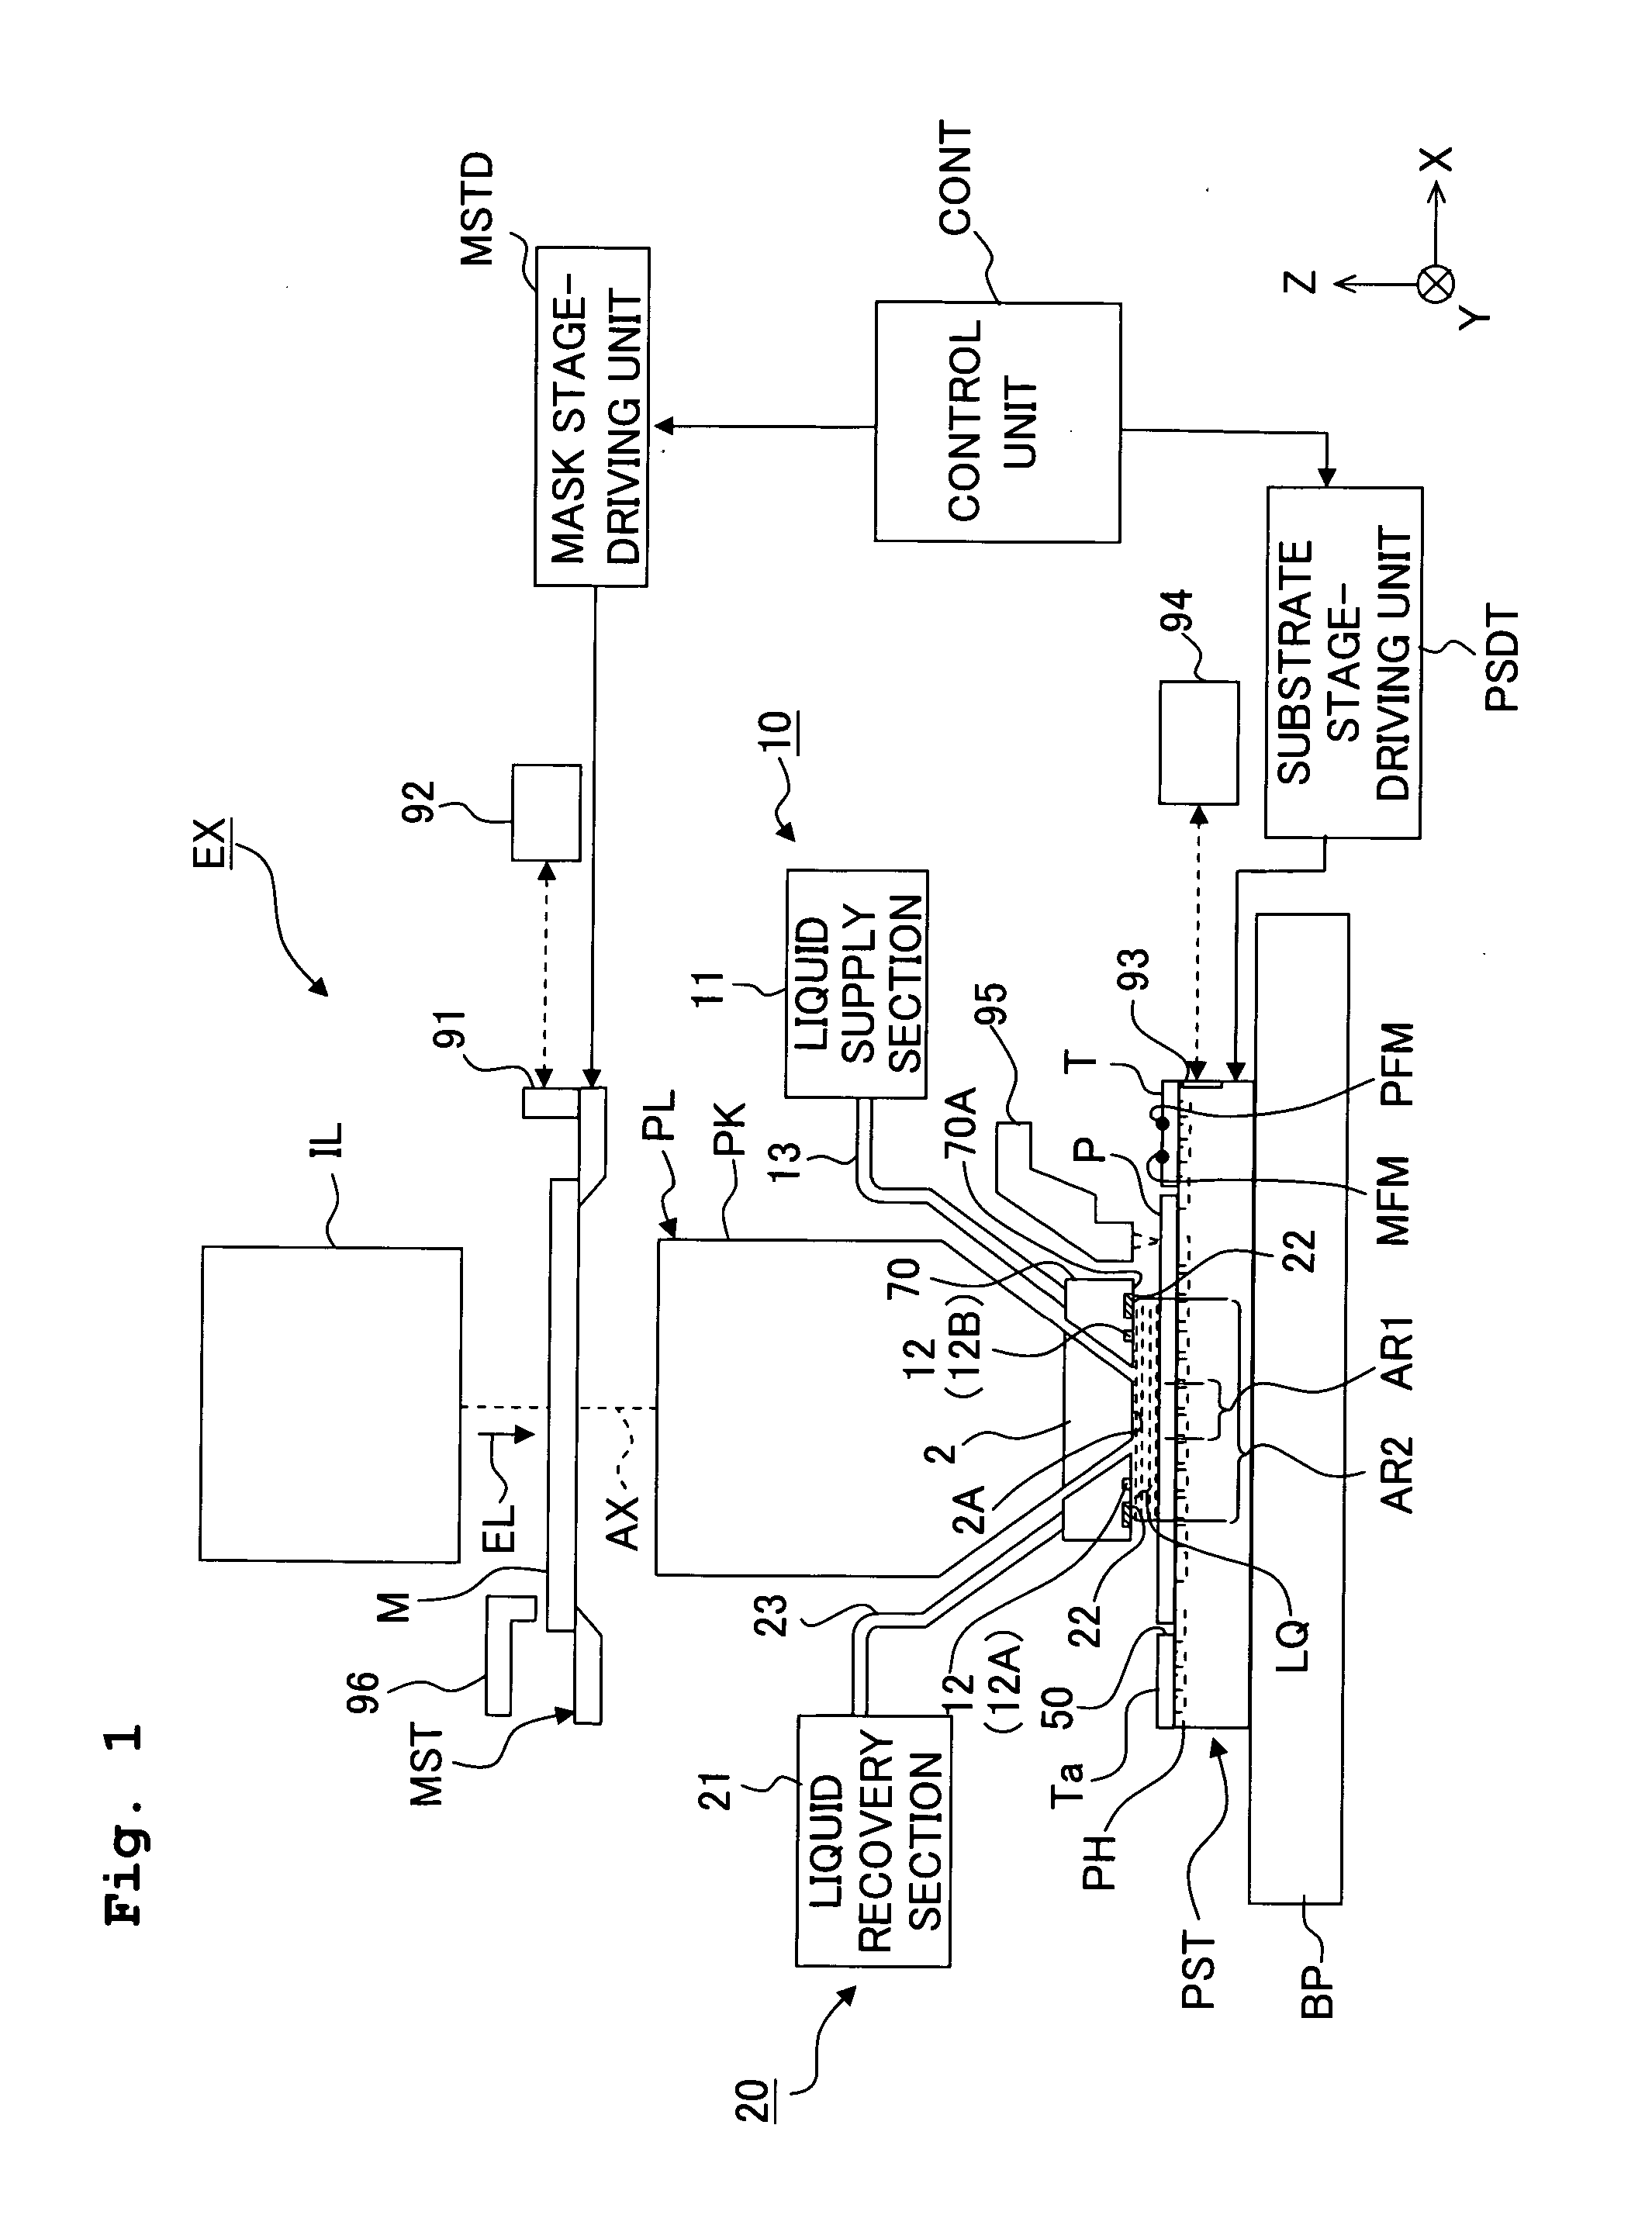 Substrate holding unit, exposure apparatus having same, exposure method, method for producing device, and liquid repellent plate